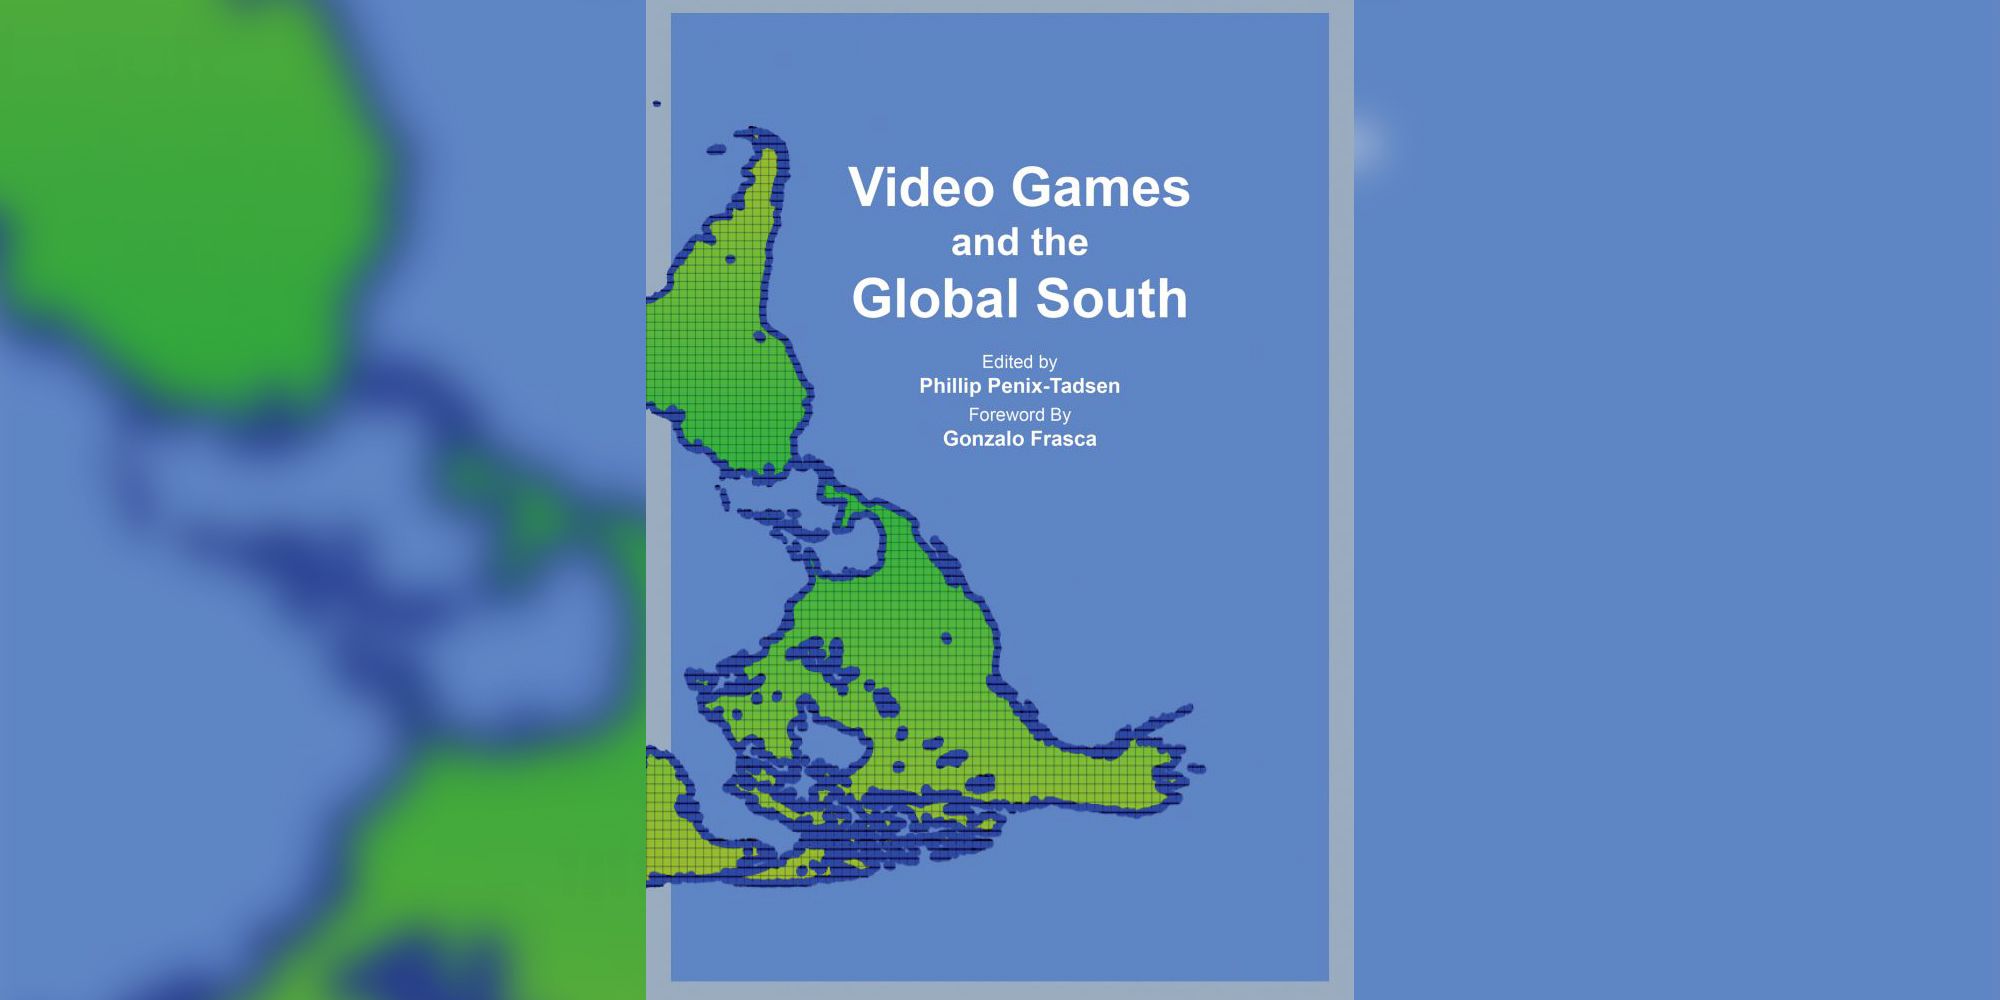 Image Showing The Cover of Video Games and the Global South edited by Philip Penid-Tadsen